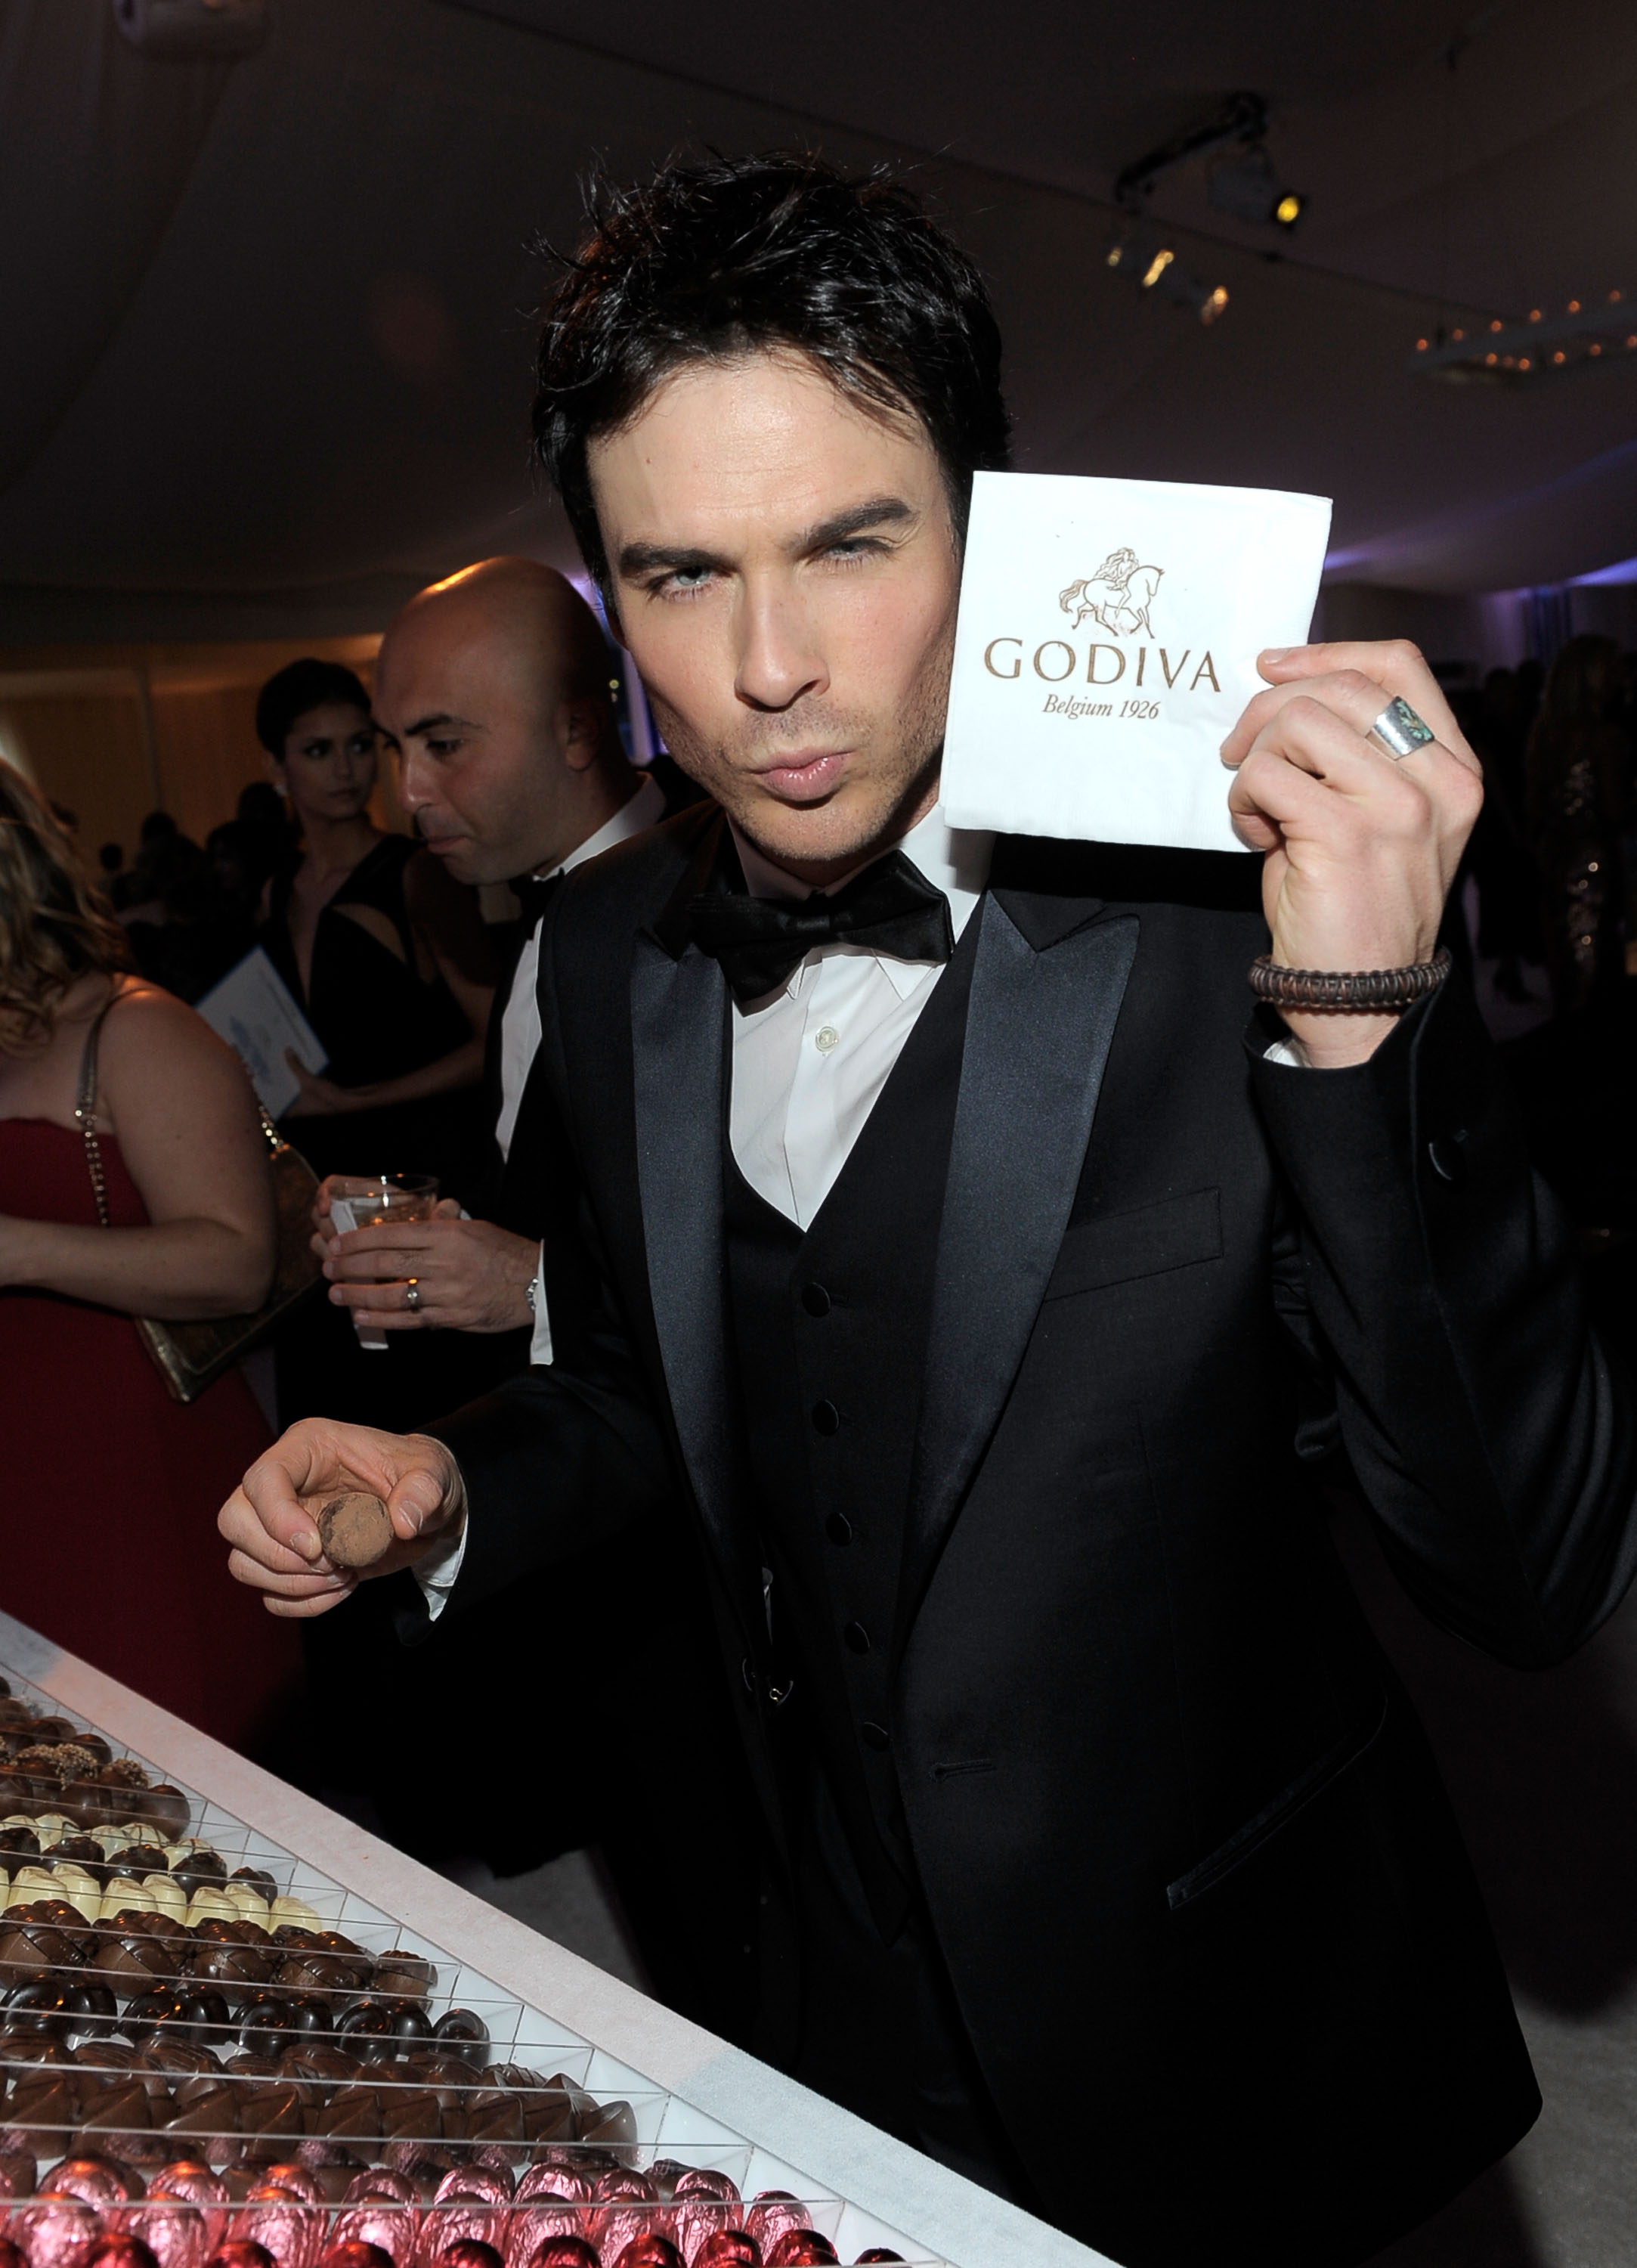 (Charley Gallay/Getty Images for Godiva)